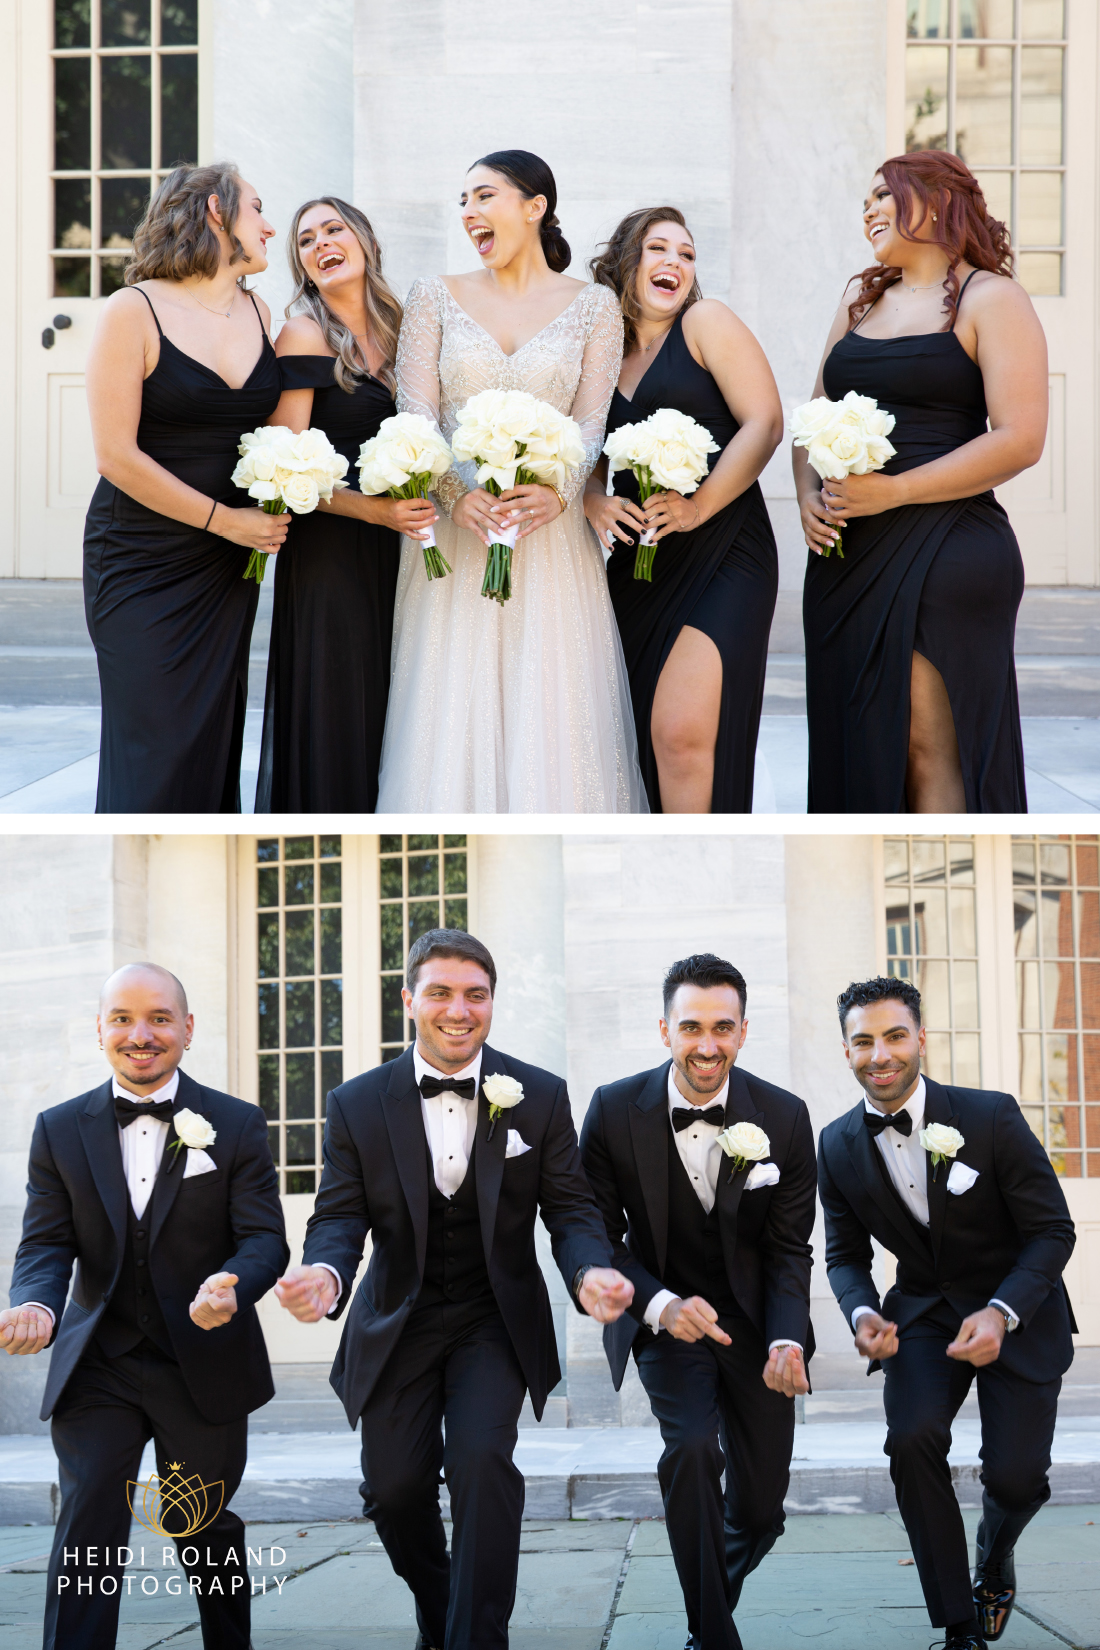 Bride laughing with her bridesmaids and grooms snapping and walking together on wedding day in philadelphia